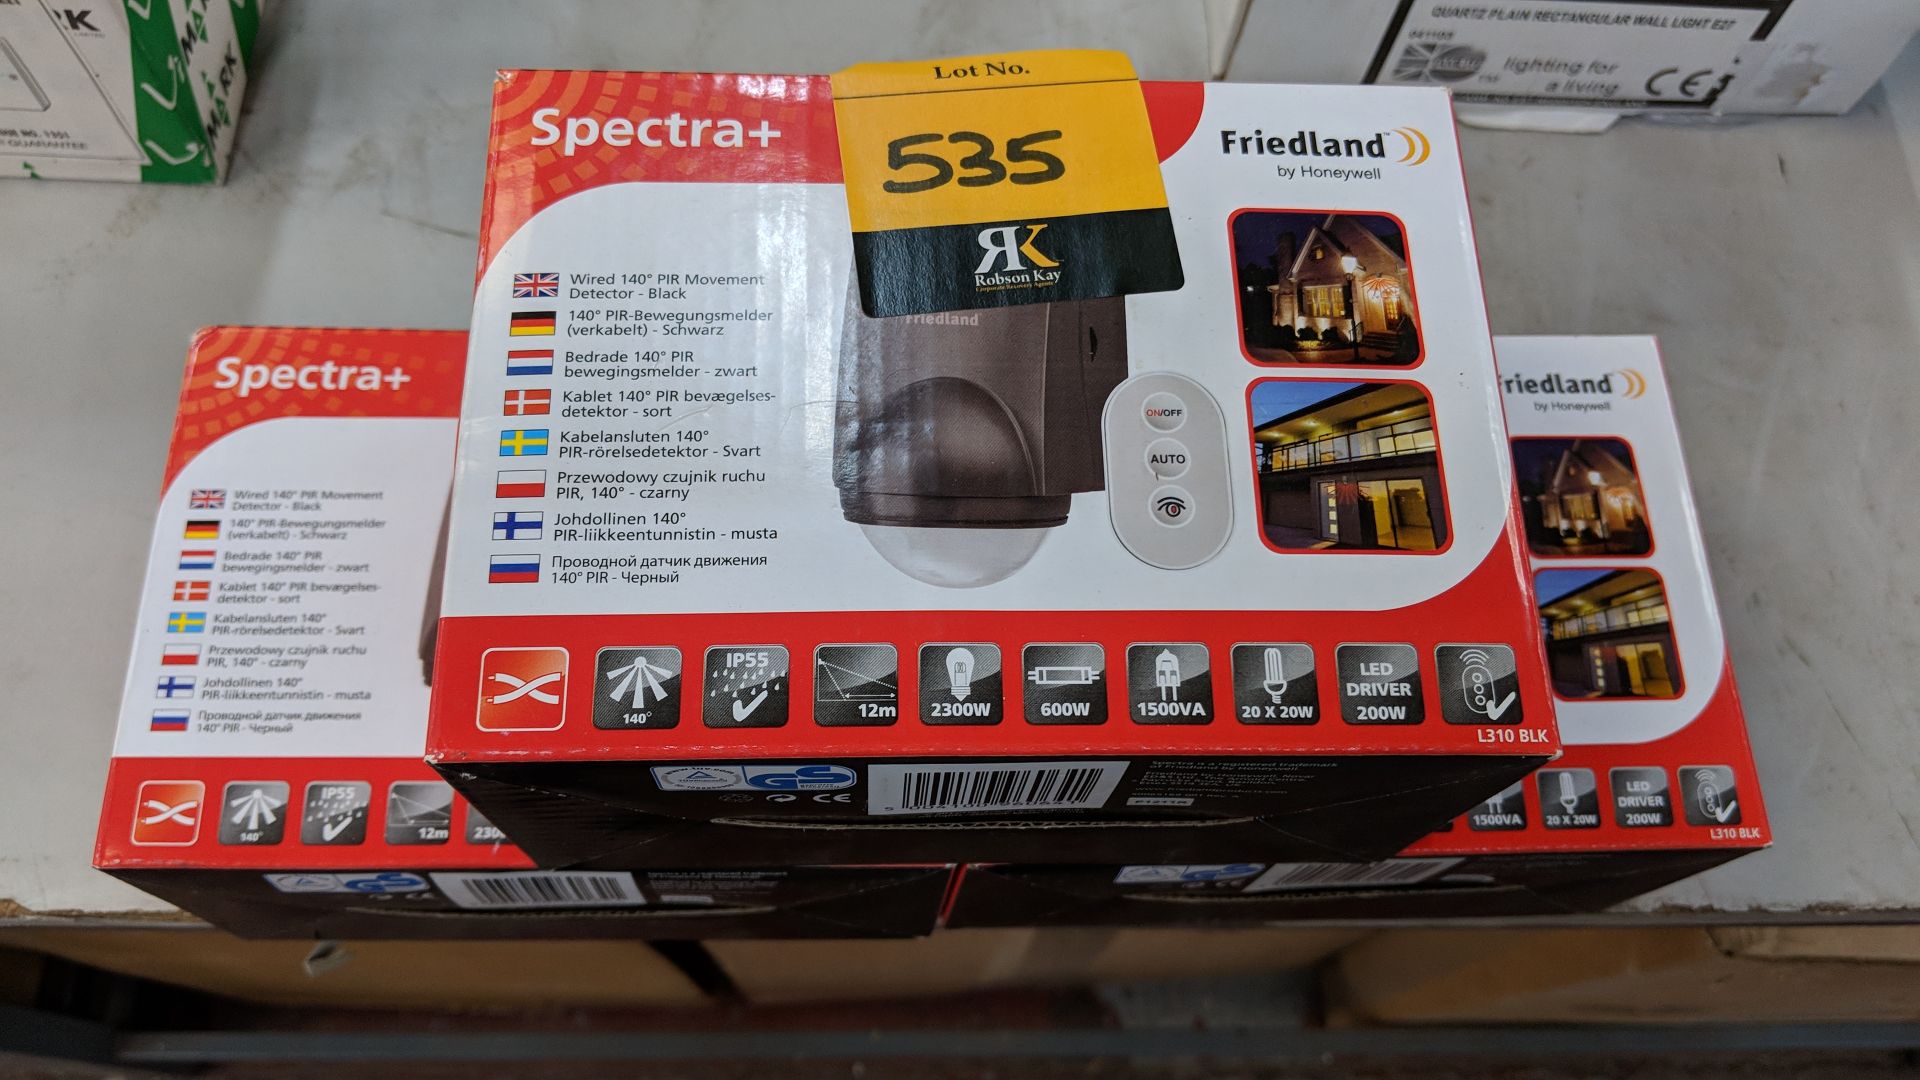 3 off Friedland Spectra+ PIR detectors The vast majority of products in this auction appear new, - Image 2 of 3